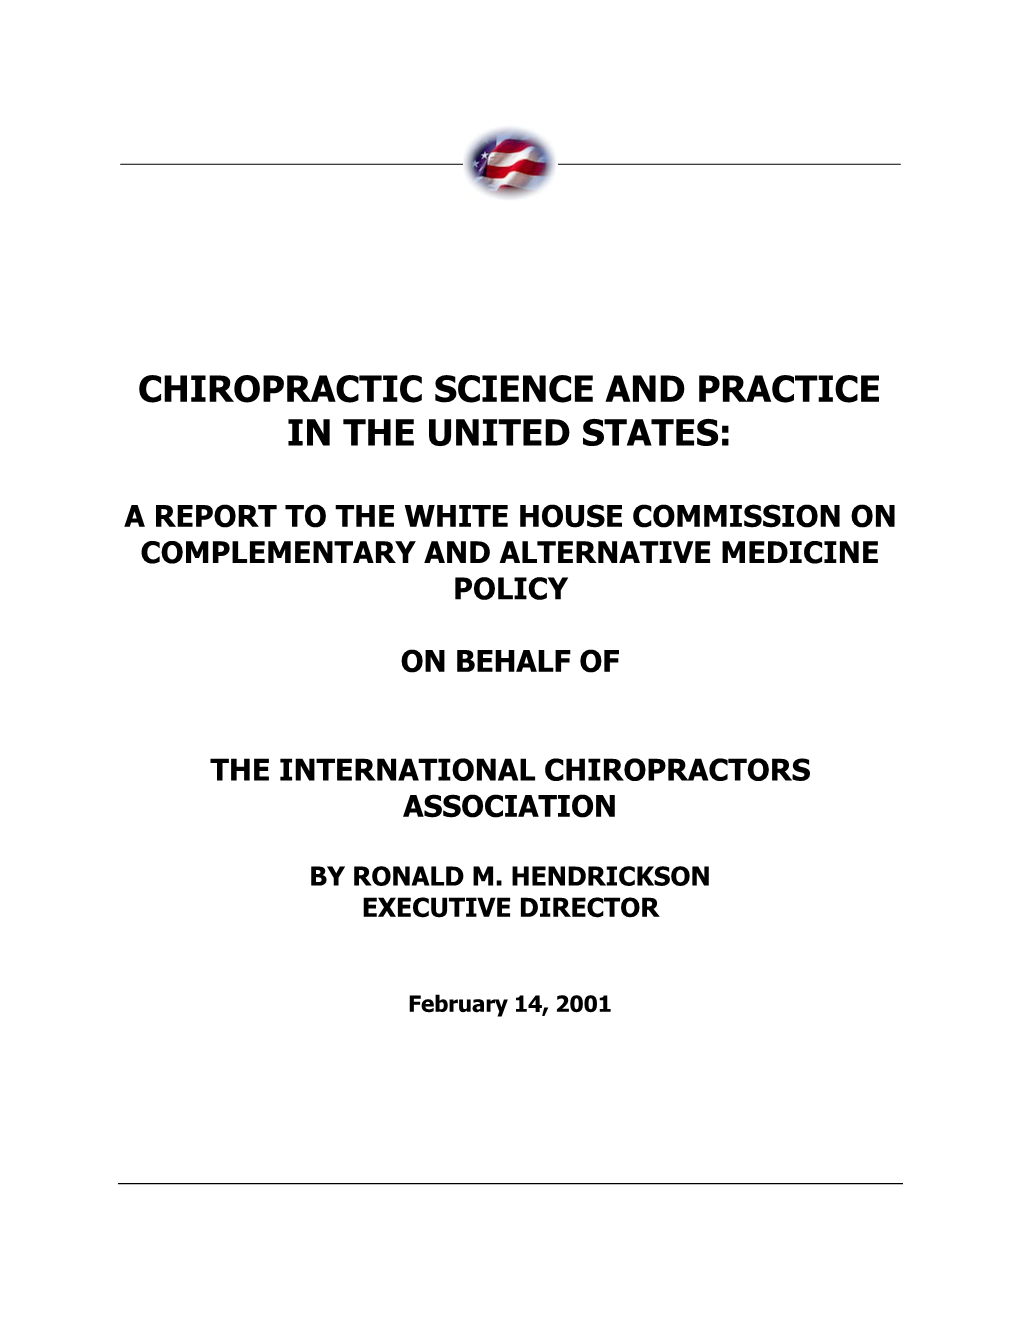 Chiropractic Science and Practice in the United States